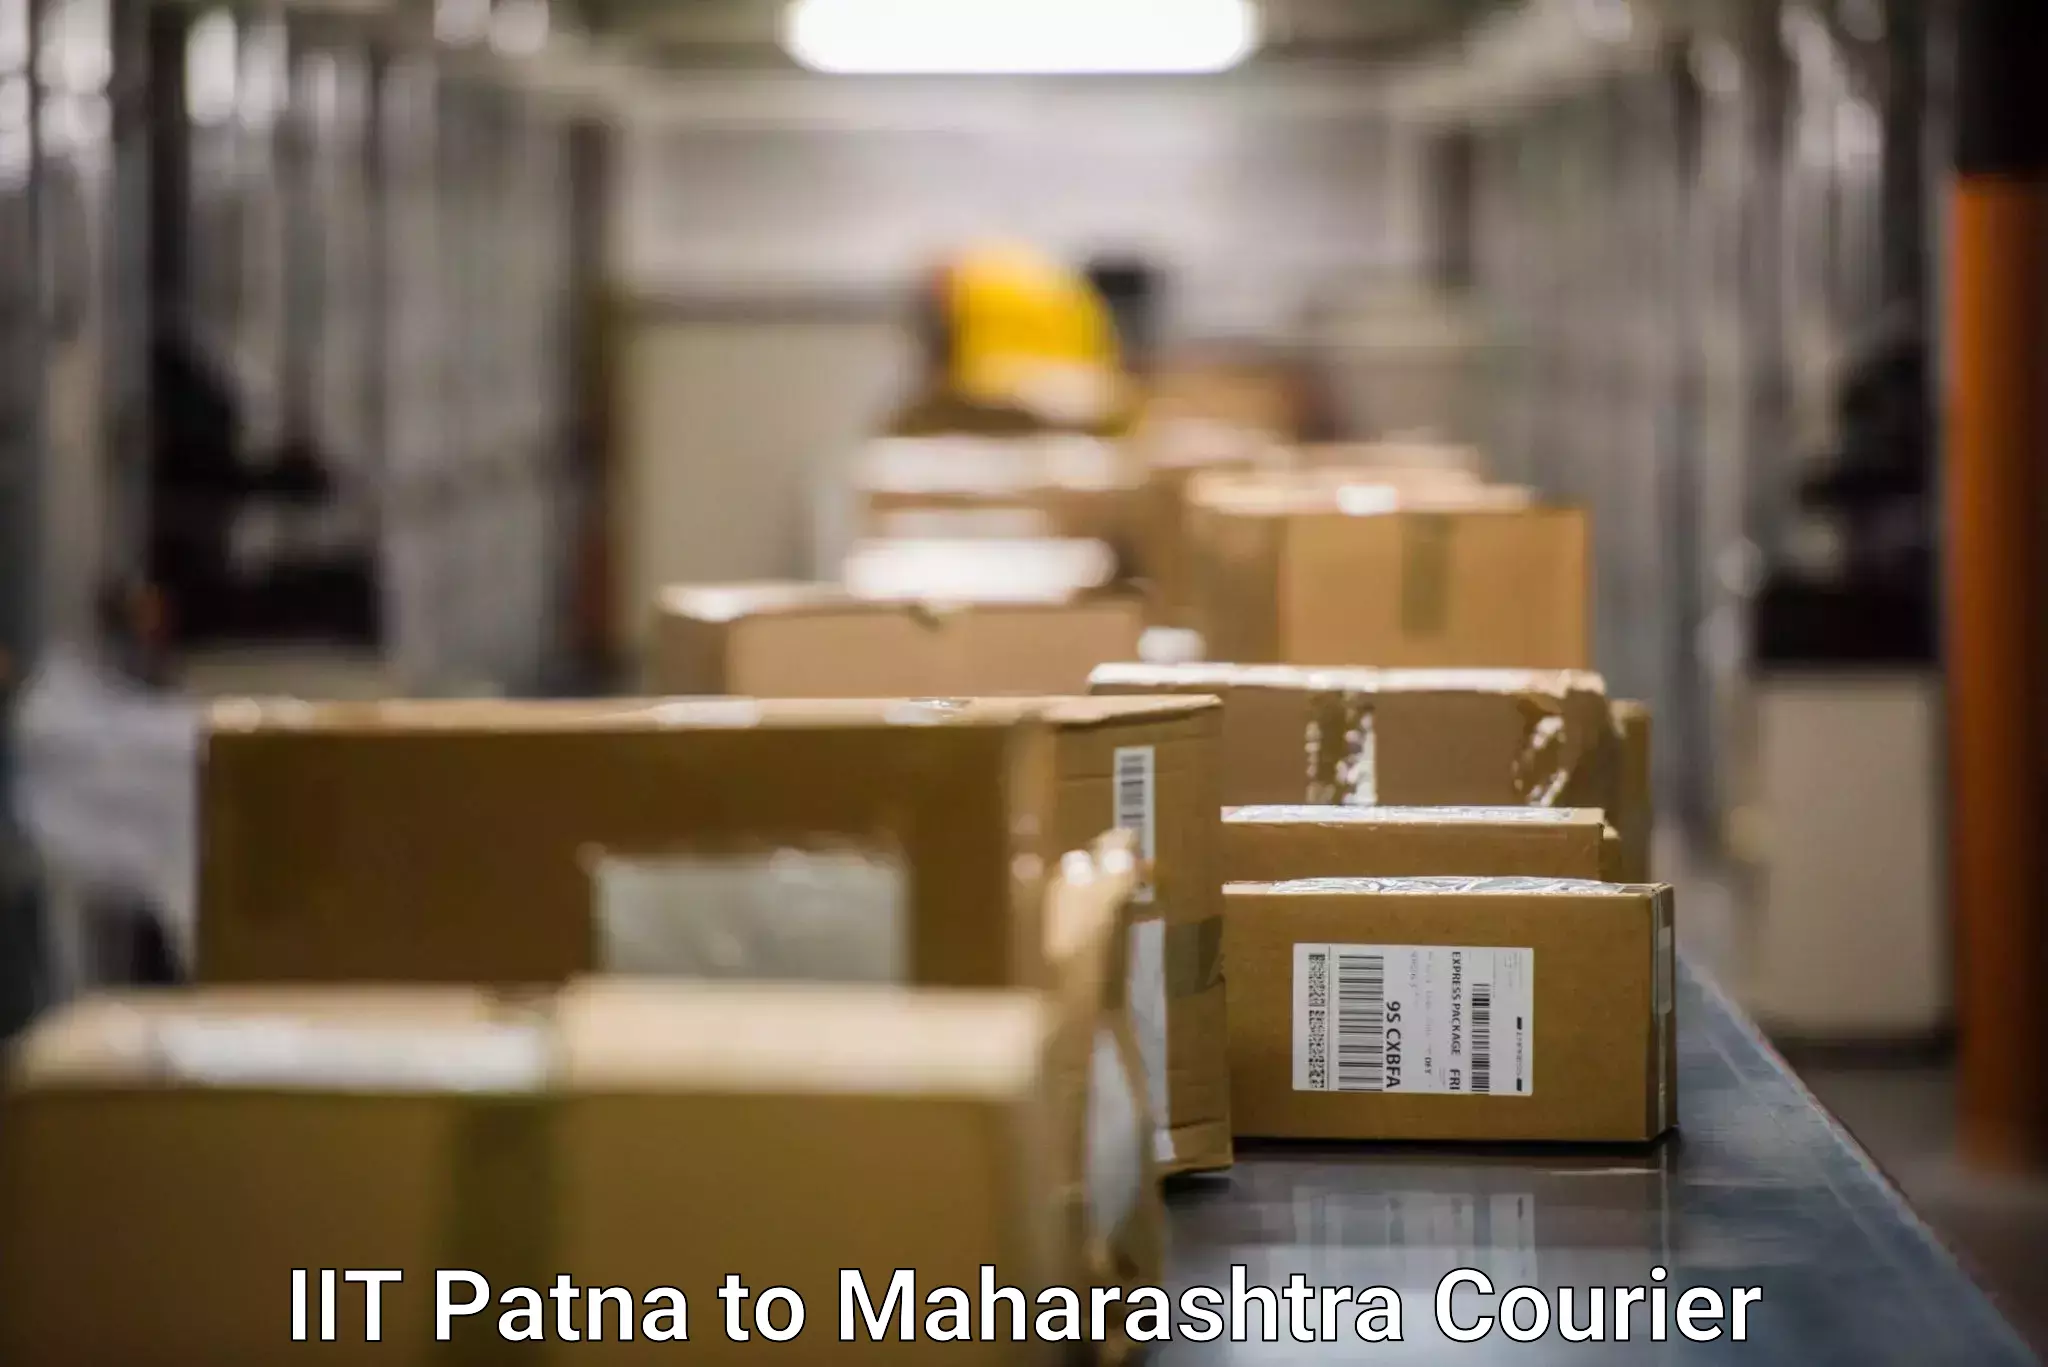 Large package courier IIT Patna to Aurangabad